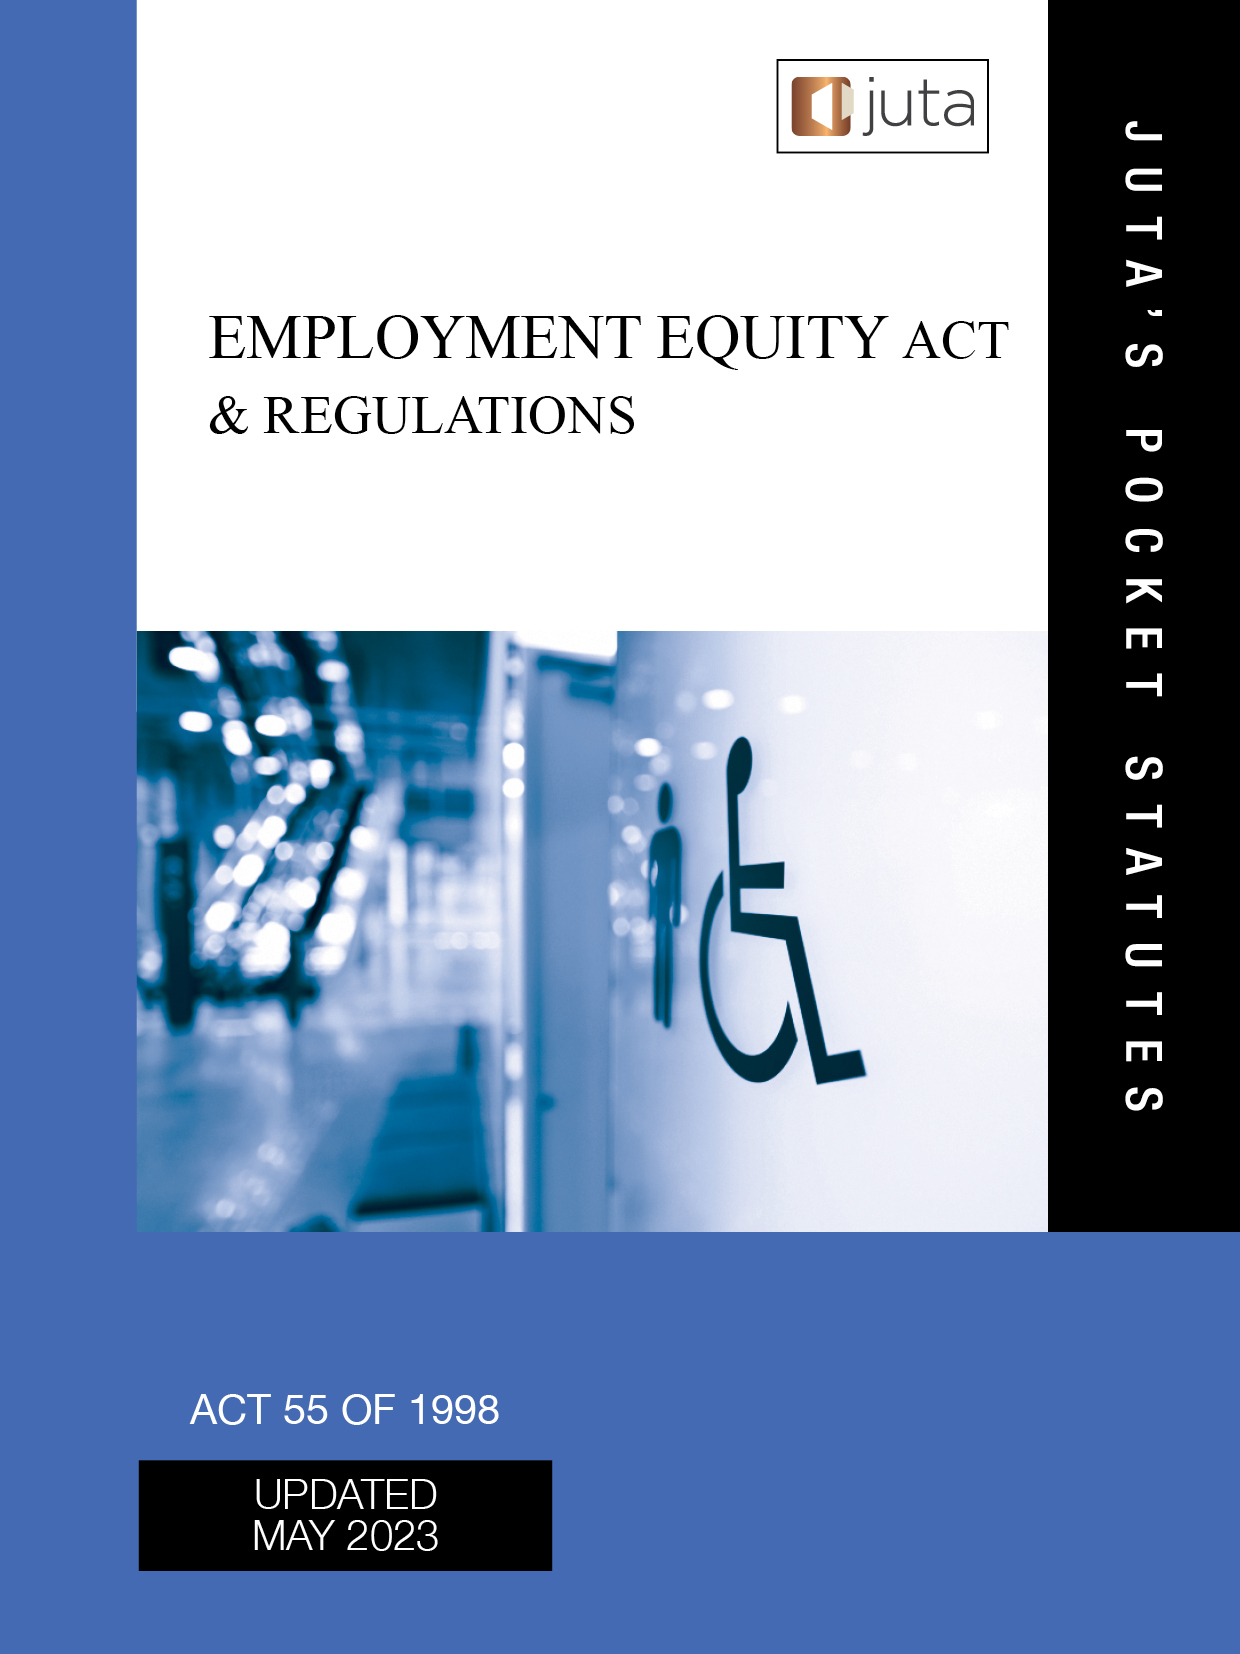 Employment Equity Act 55 of 1998 & Regulations